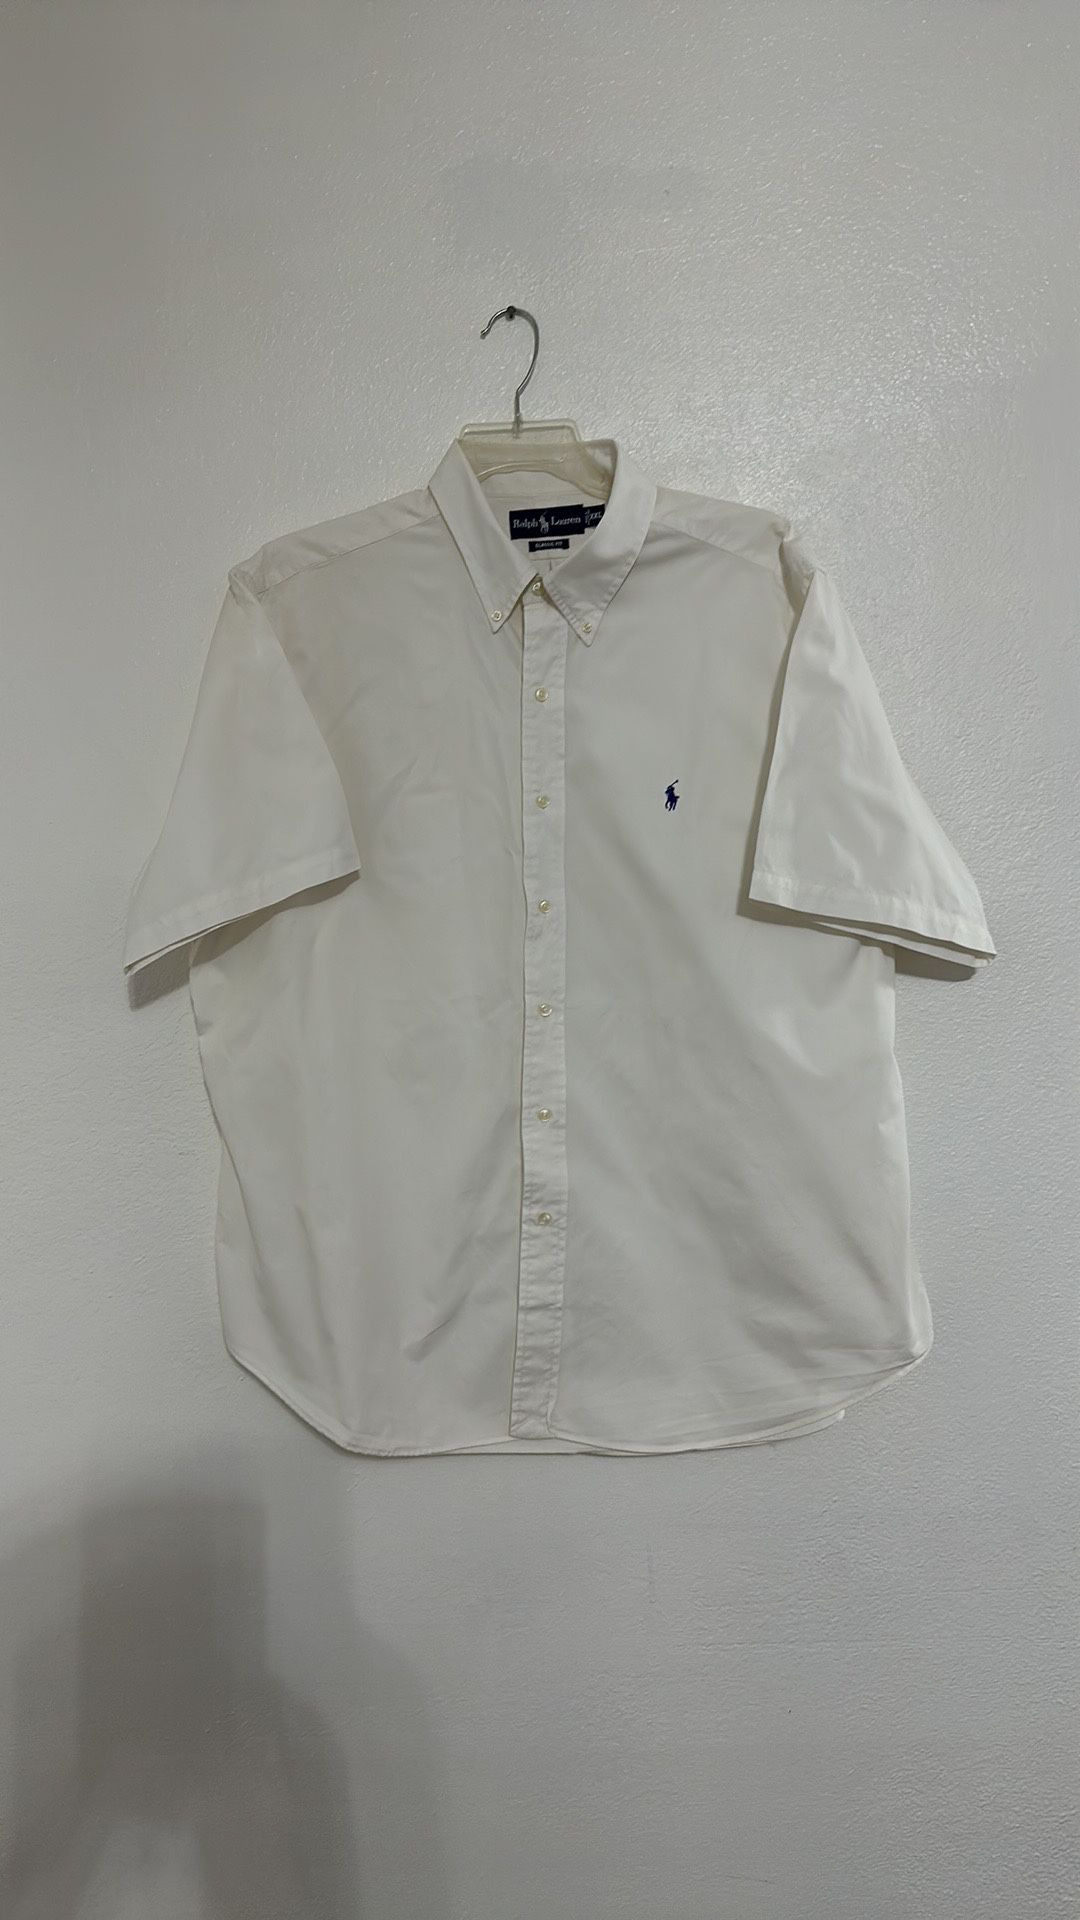 Ralph Lauren Classic Fit, Cotton Man’s Shirt, White, Size XXL, Short Sleeve, in Great Condition